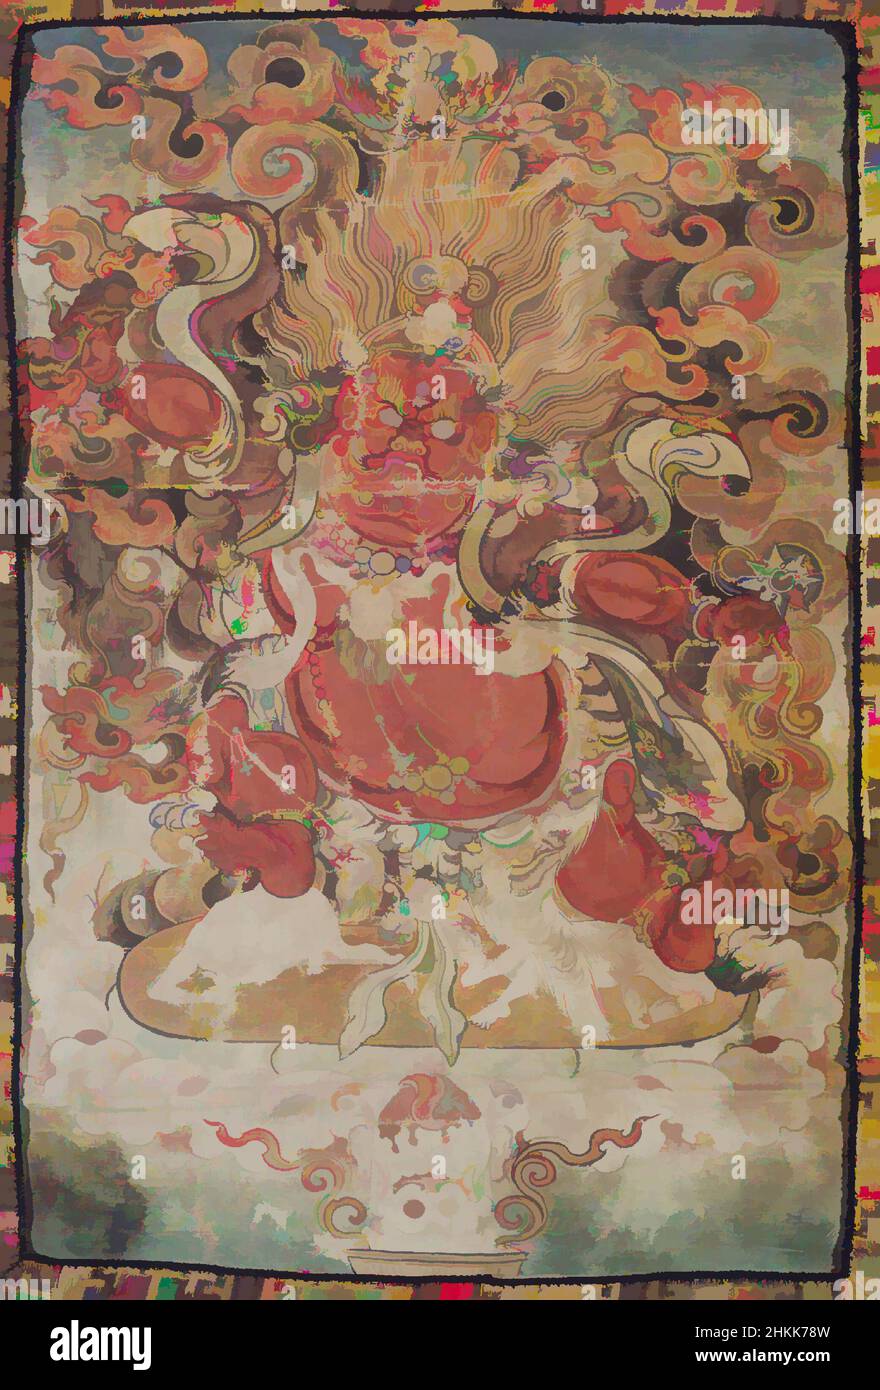 Art inspired by Wrathful Deity, Hanging scroll, gouache on linen, Tibet, late 18th-19th century, 9 1/2 x 6 1/2 in., 24.1 x 16.5 cm, gouache, linen, scroll, Classic works modernized by Artotop with a splash of modernity. Shapes, color and value, eye-catching visual impact on art. Emotions through freedom of artworks in a contemporary way. A timeless message pursuing a wildly creative new direction. Artists turning to the digital medium and creating the Artotop NFT Stock Photo